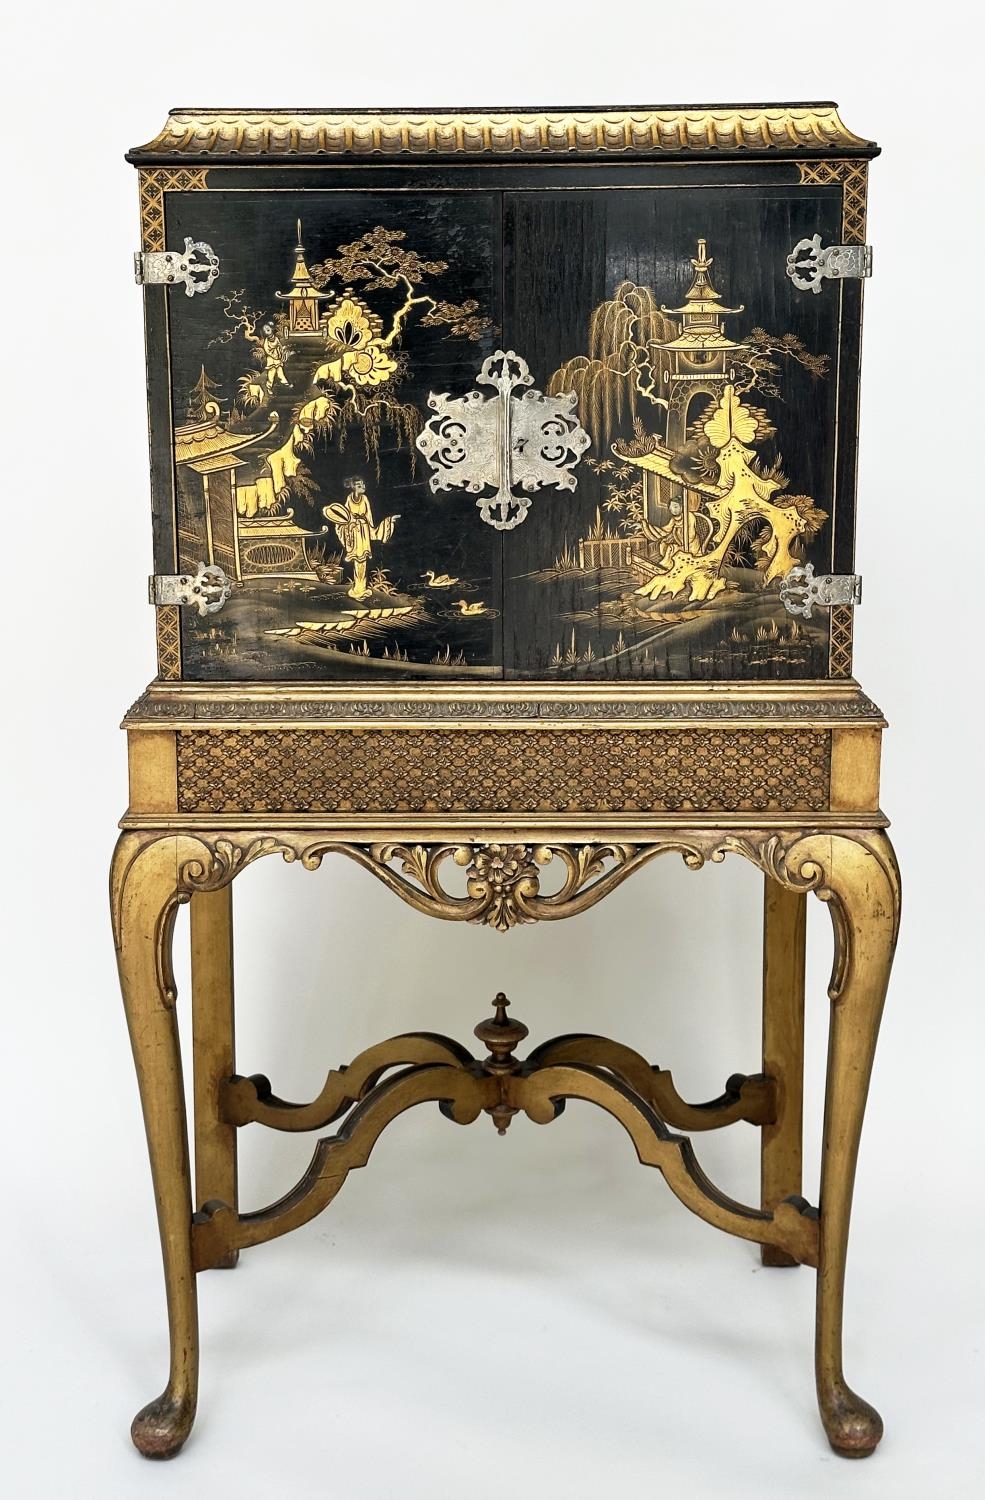 CABINET ON STAND, early 20th century English lacquered and gilt chinoiserie decorated, silvered - Image 11 of 11